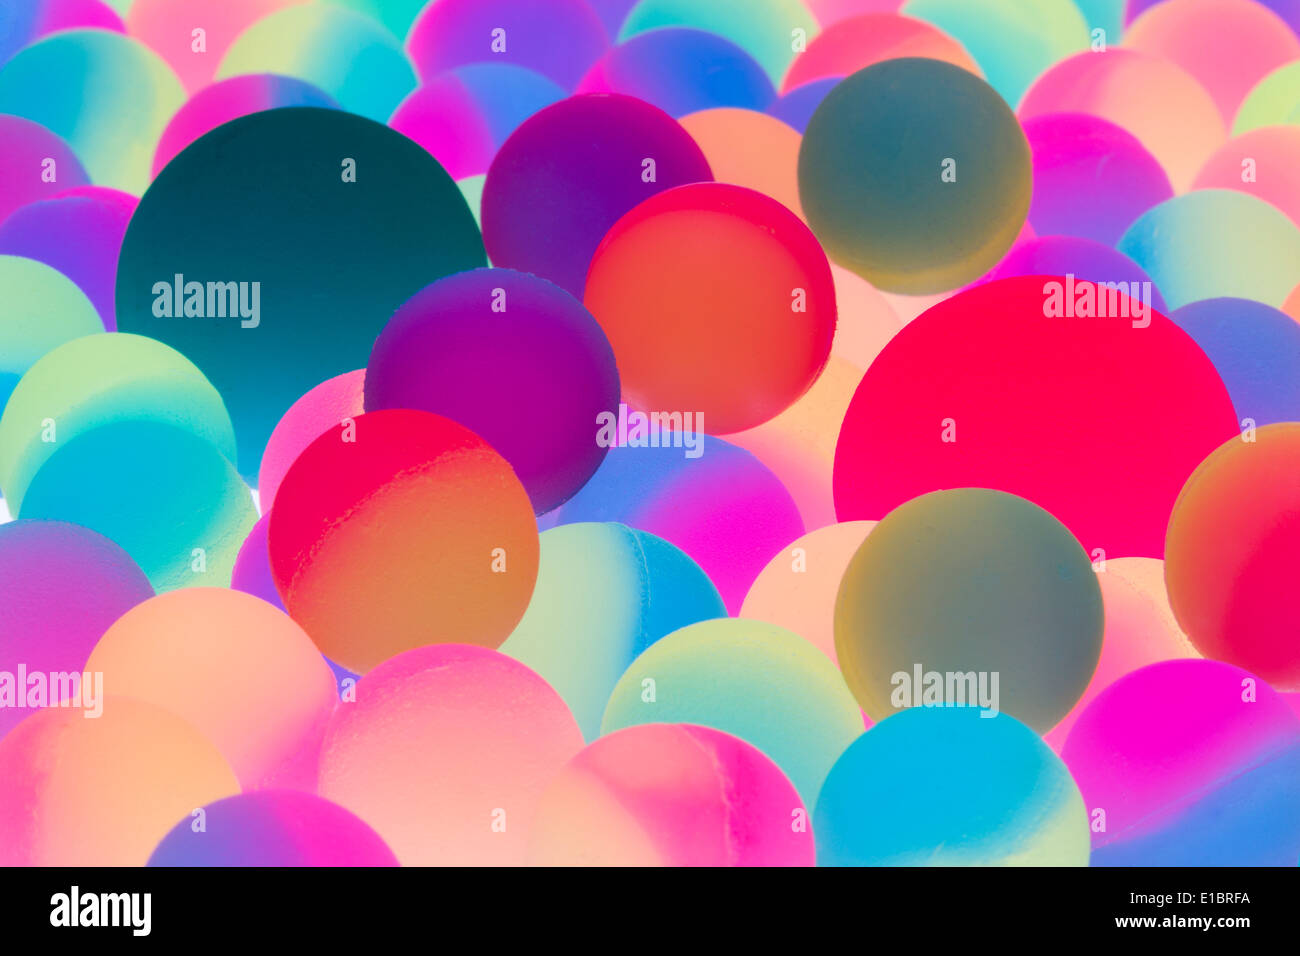 Illuminated bicolor balls background in the colors of the spectrum with a close up view of multiple balls of different sizes in Stock Photo